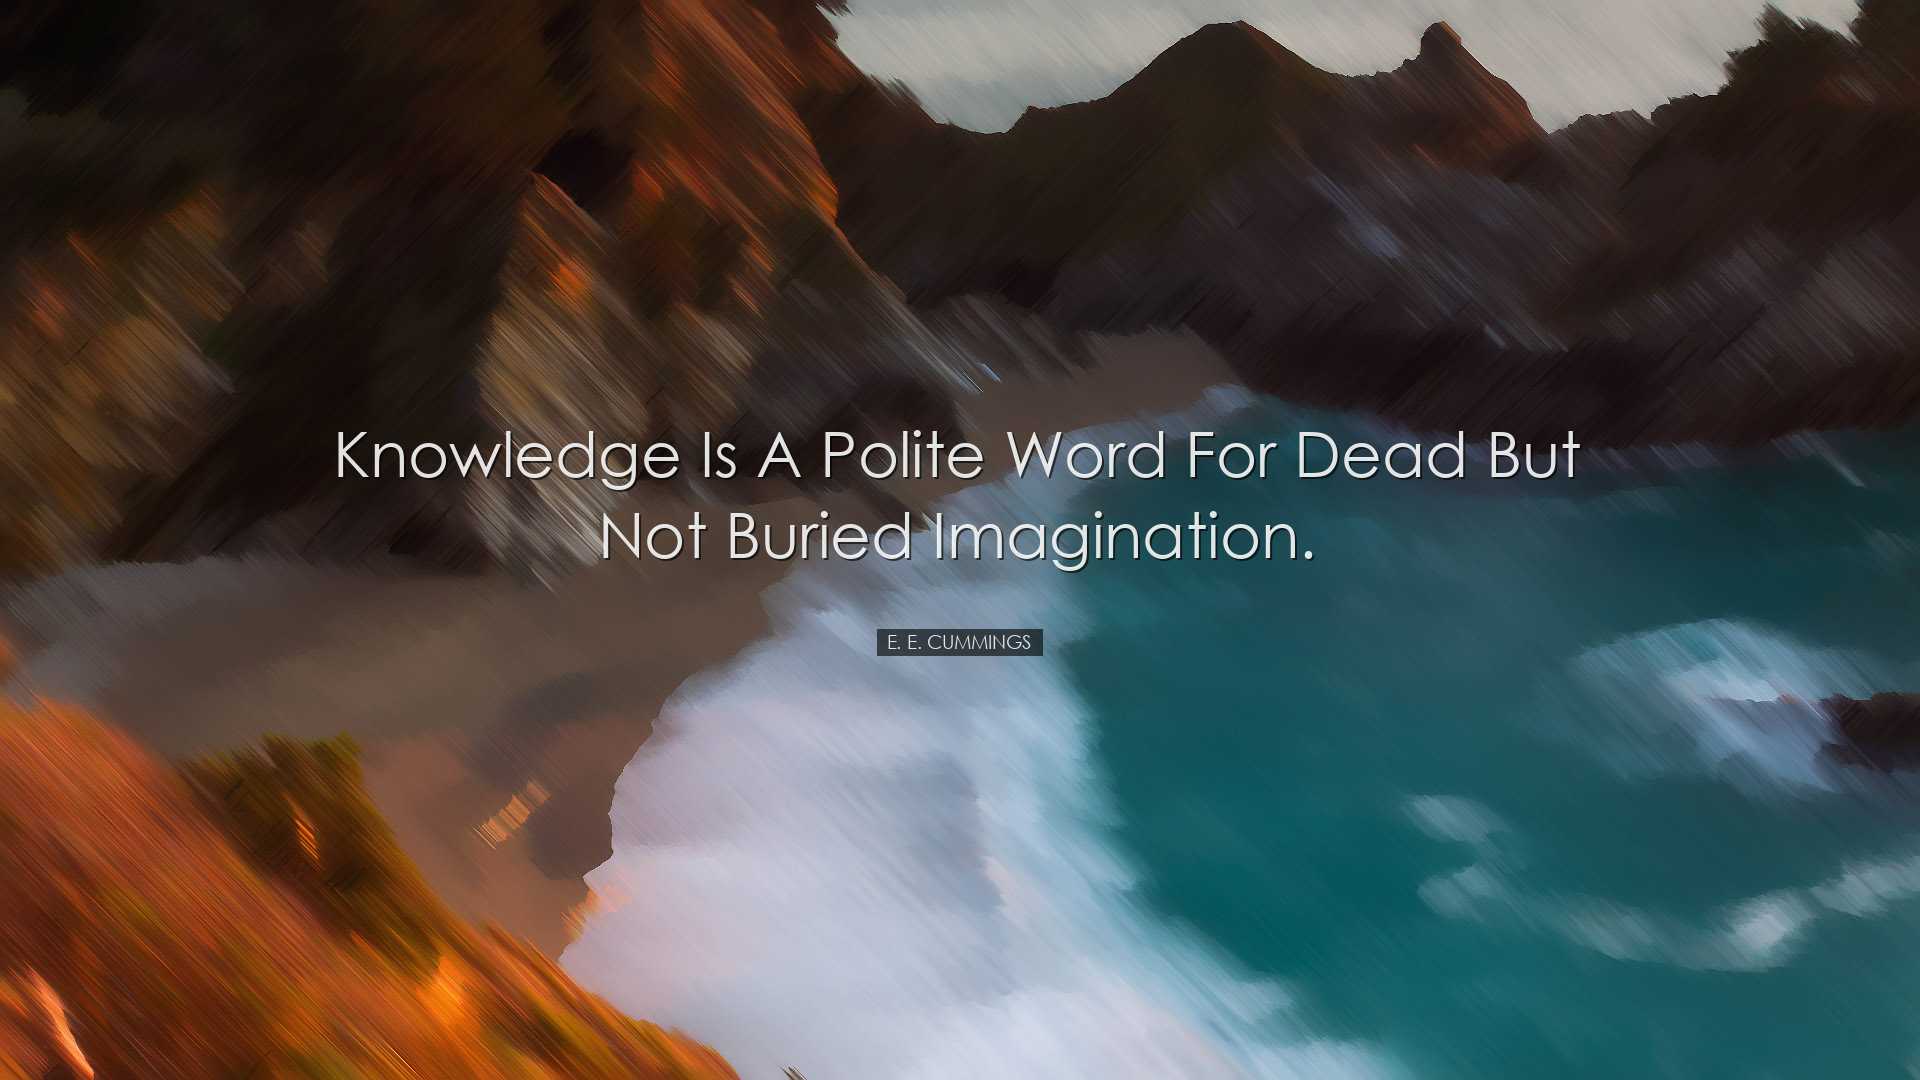 Knowledge is a polite word for dead but not buried imagination. -